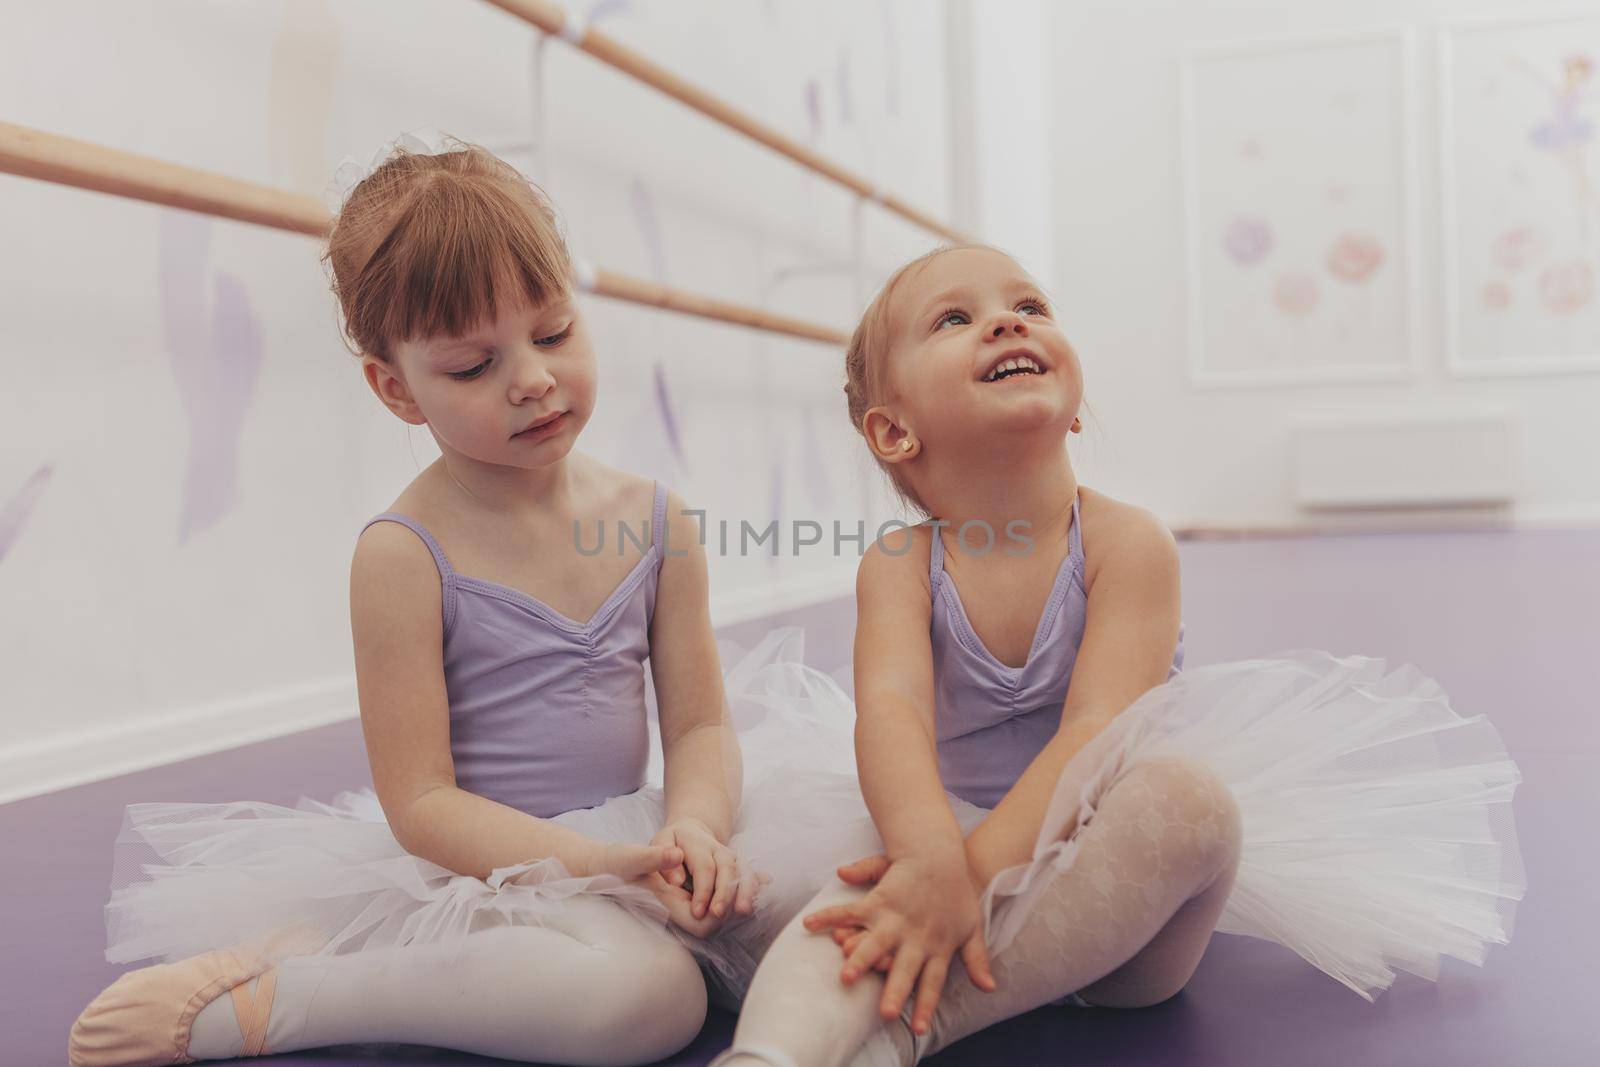 Cheerful little ballerinas having fun together at dance school. Adorable little girls sitting together on the floor, relaxing after ballet lesson. Adorable little friends at ballet studio